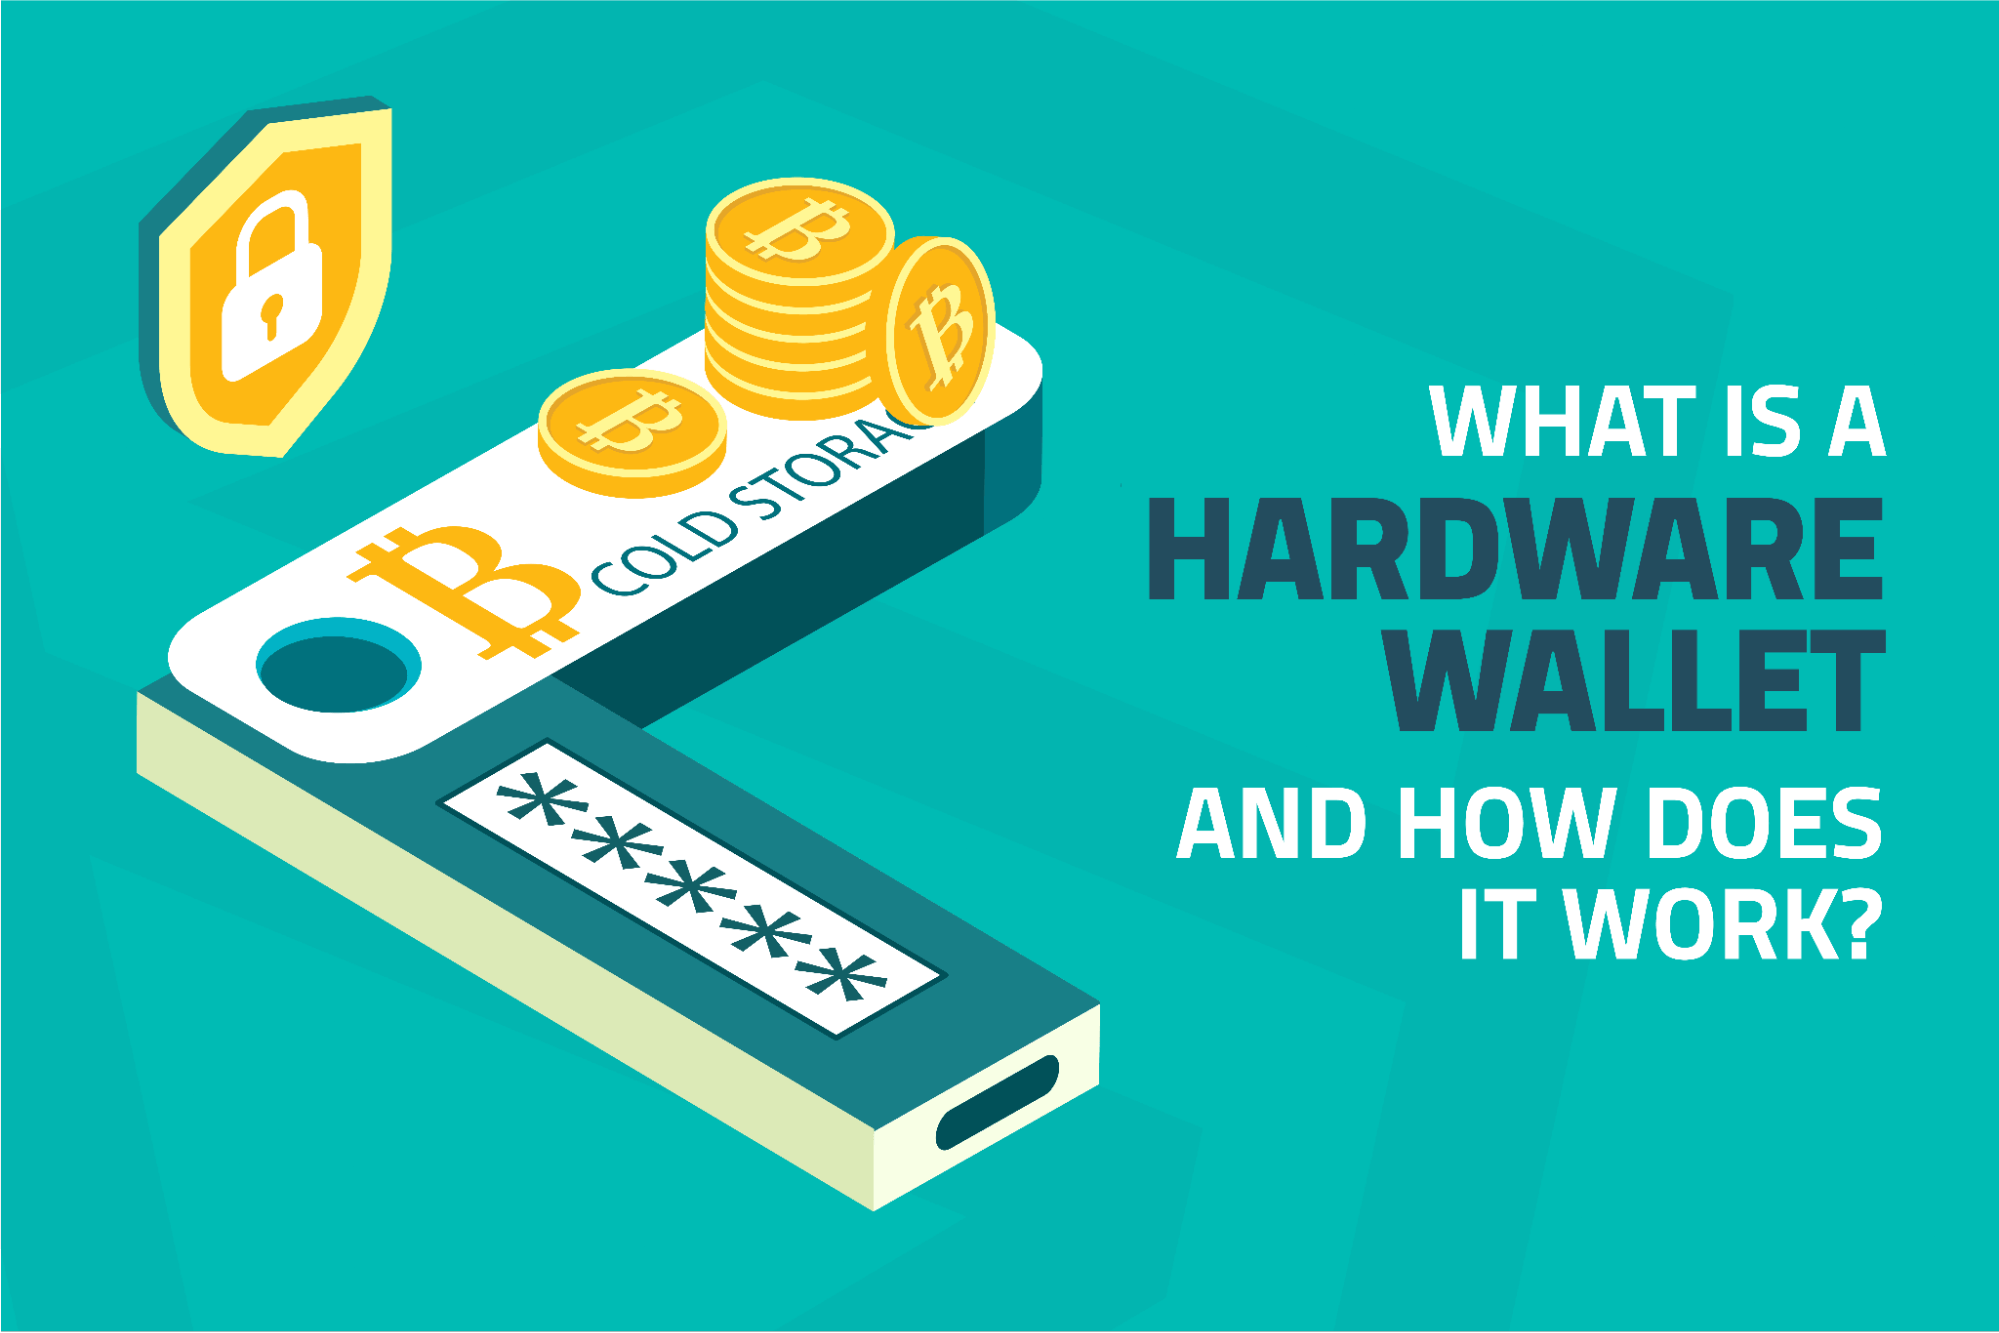 What is a Hardware wallet and how does it work?